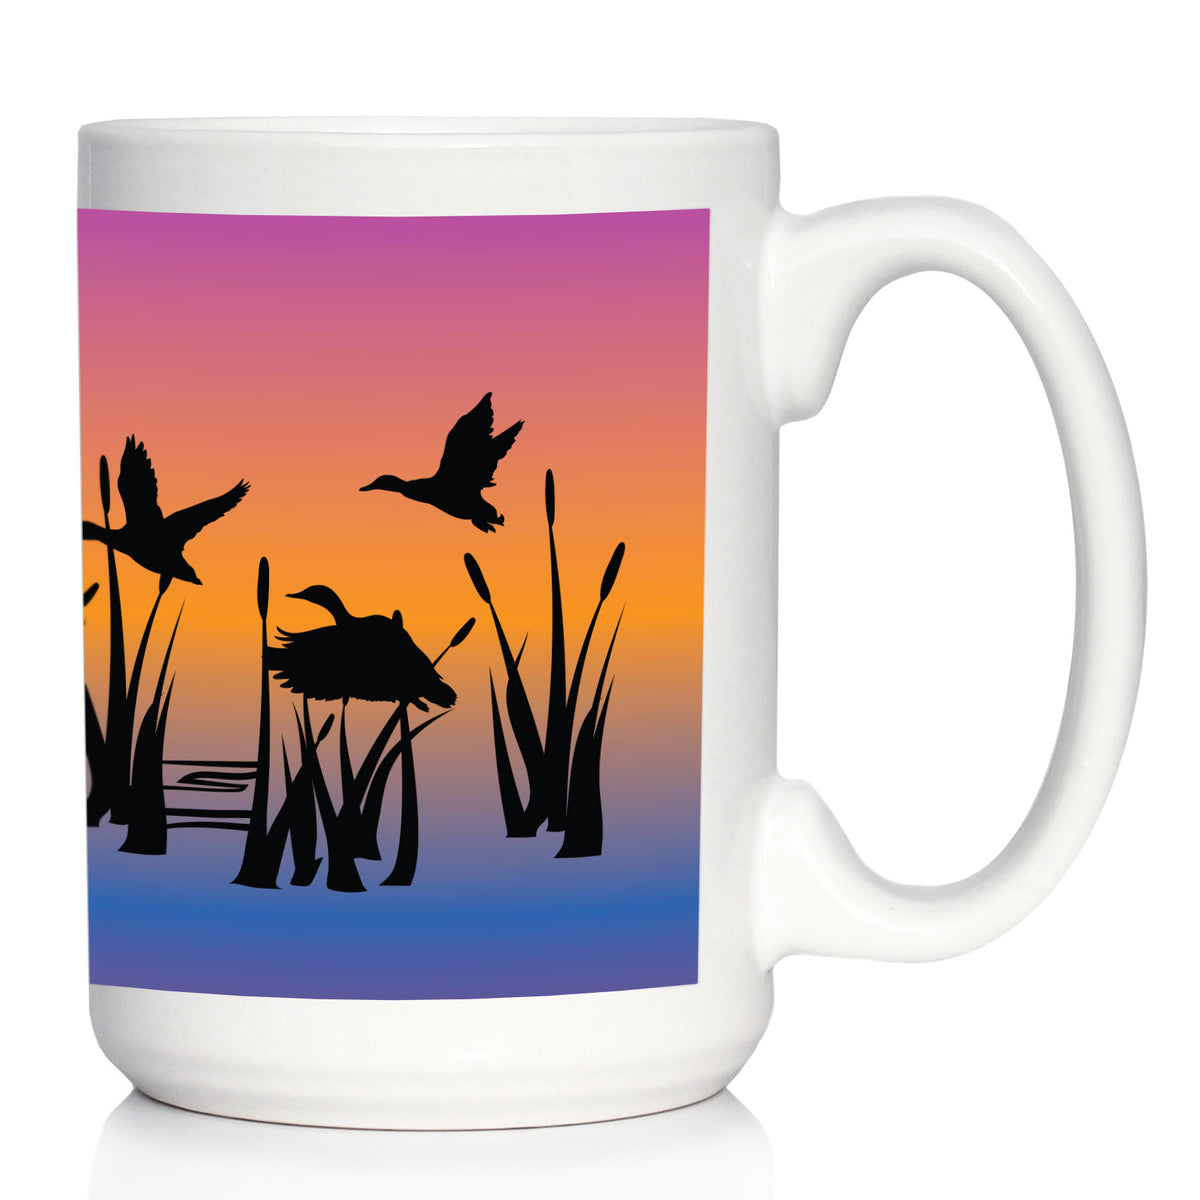 Duck Pond Coffee Mug - Duck Gifts and Rustic Decor for Duck Hunters